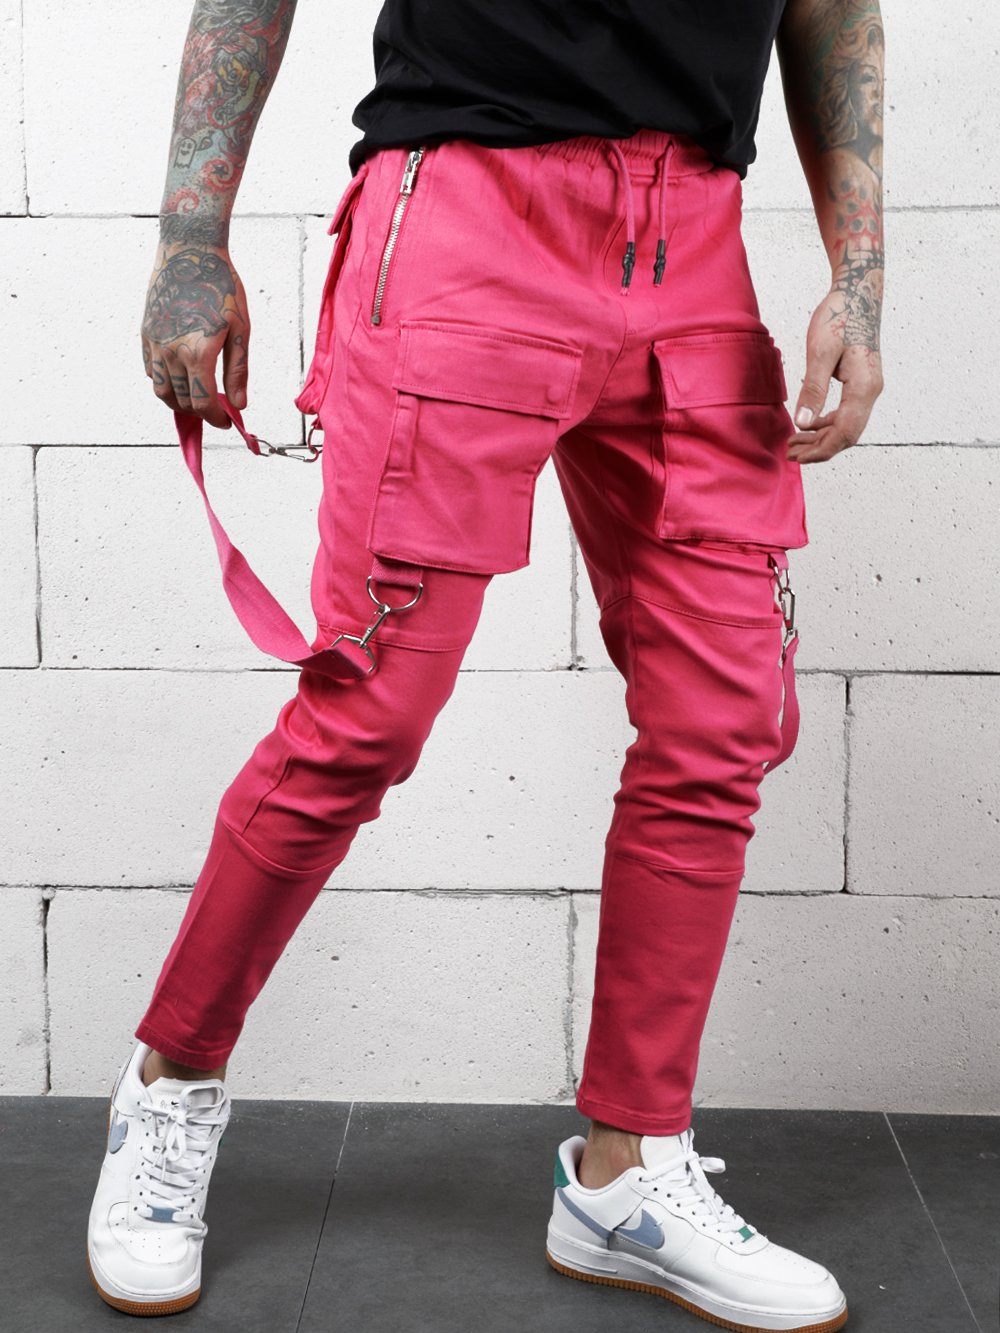 A man wearing the PINK BRONX cargo pants with zippers.